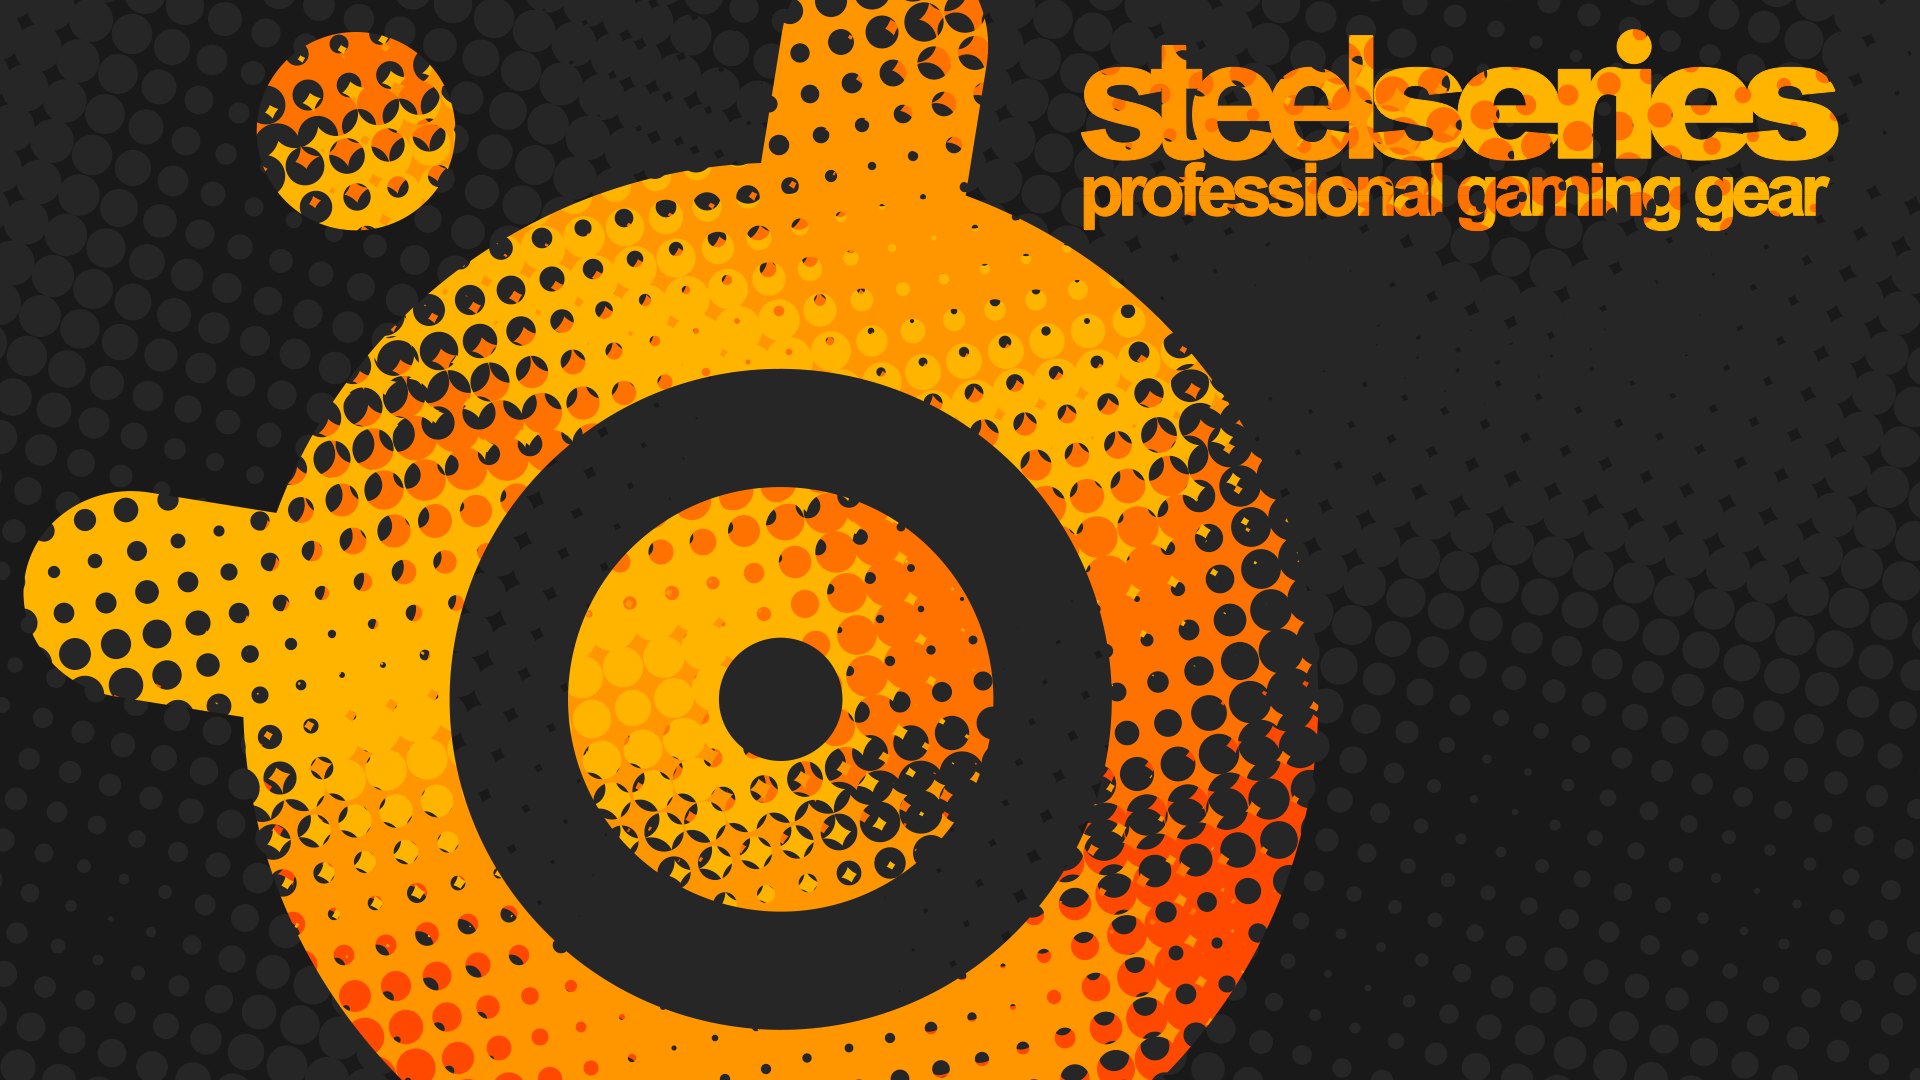 Steelseries Wallpapers - #1 Collection on Behance